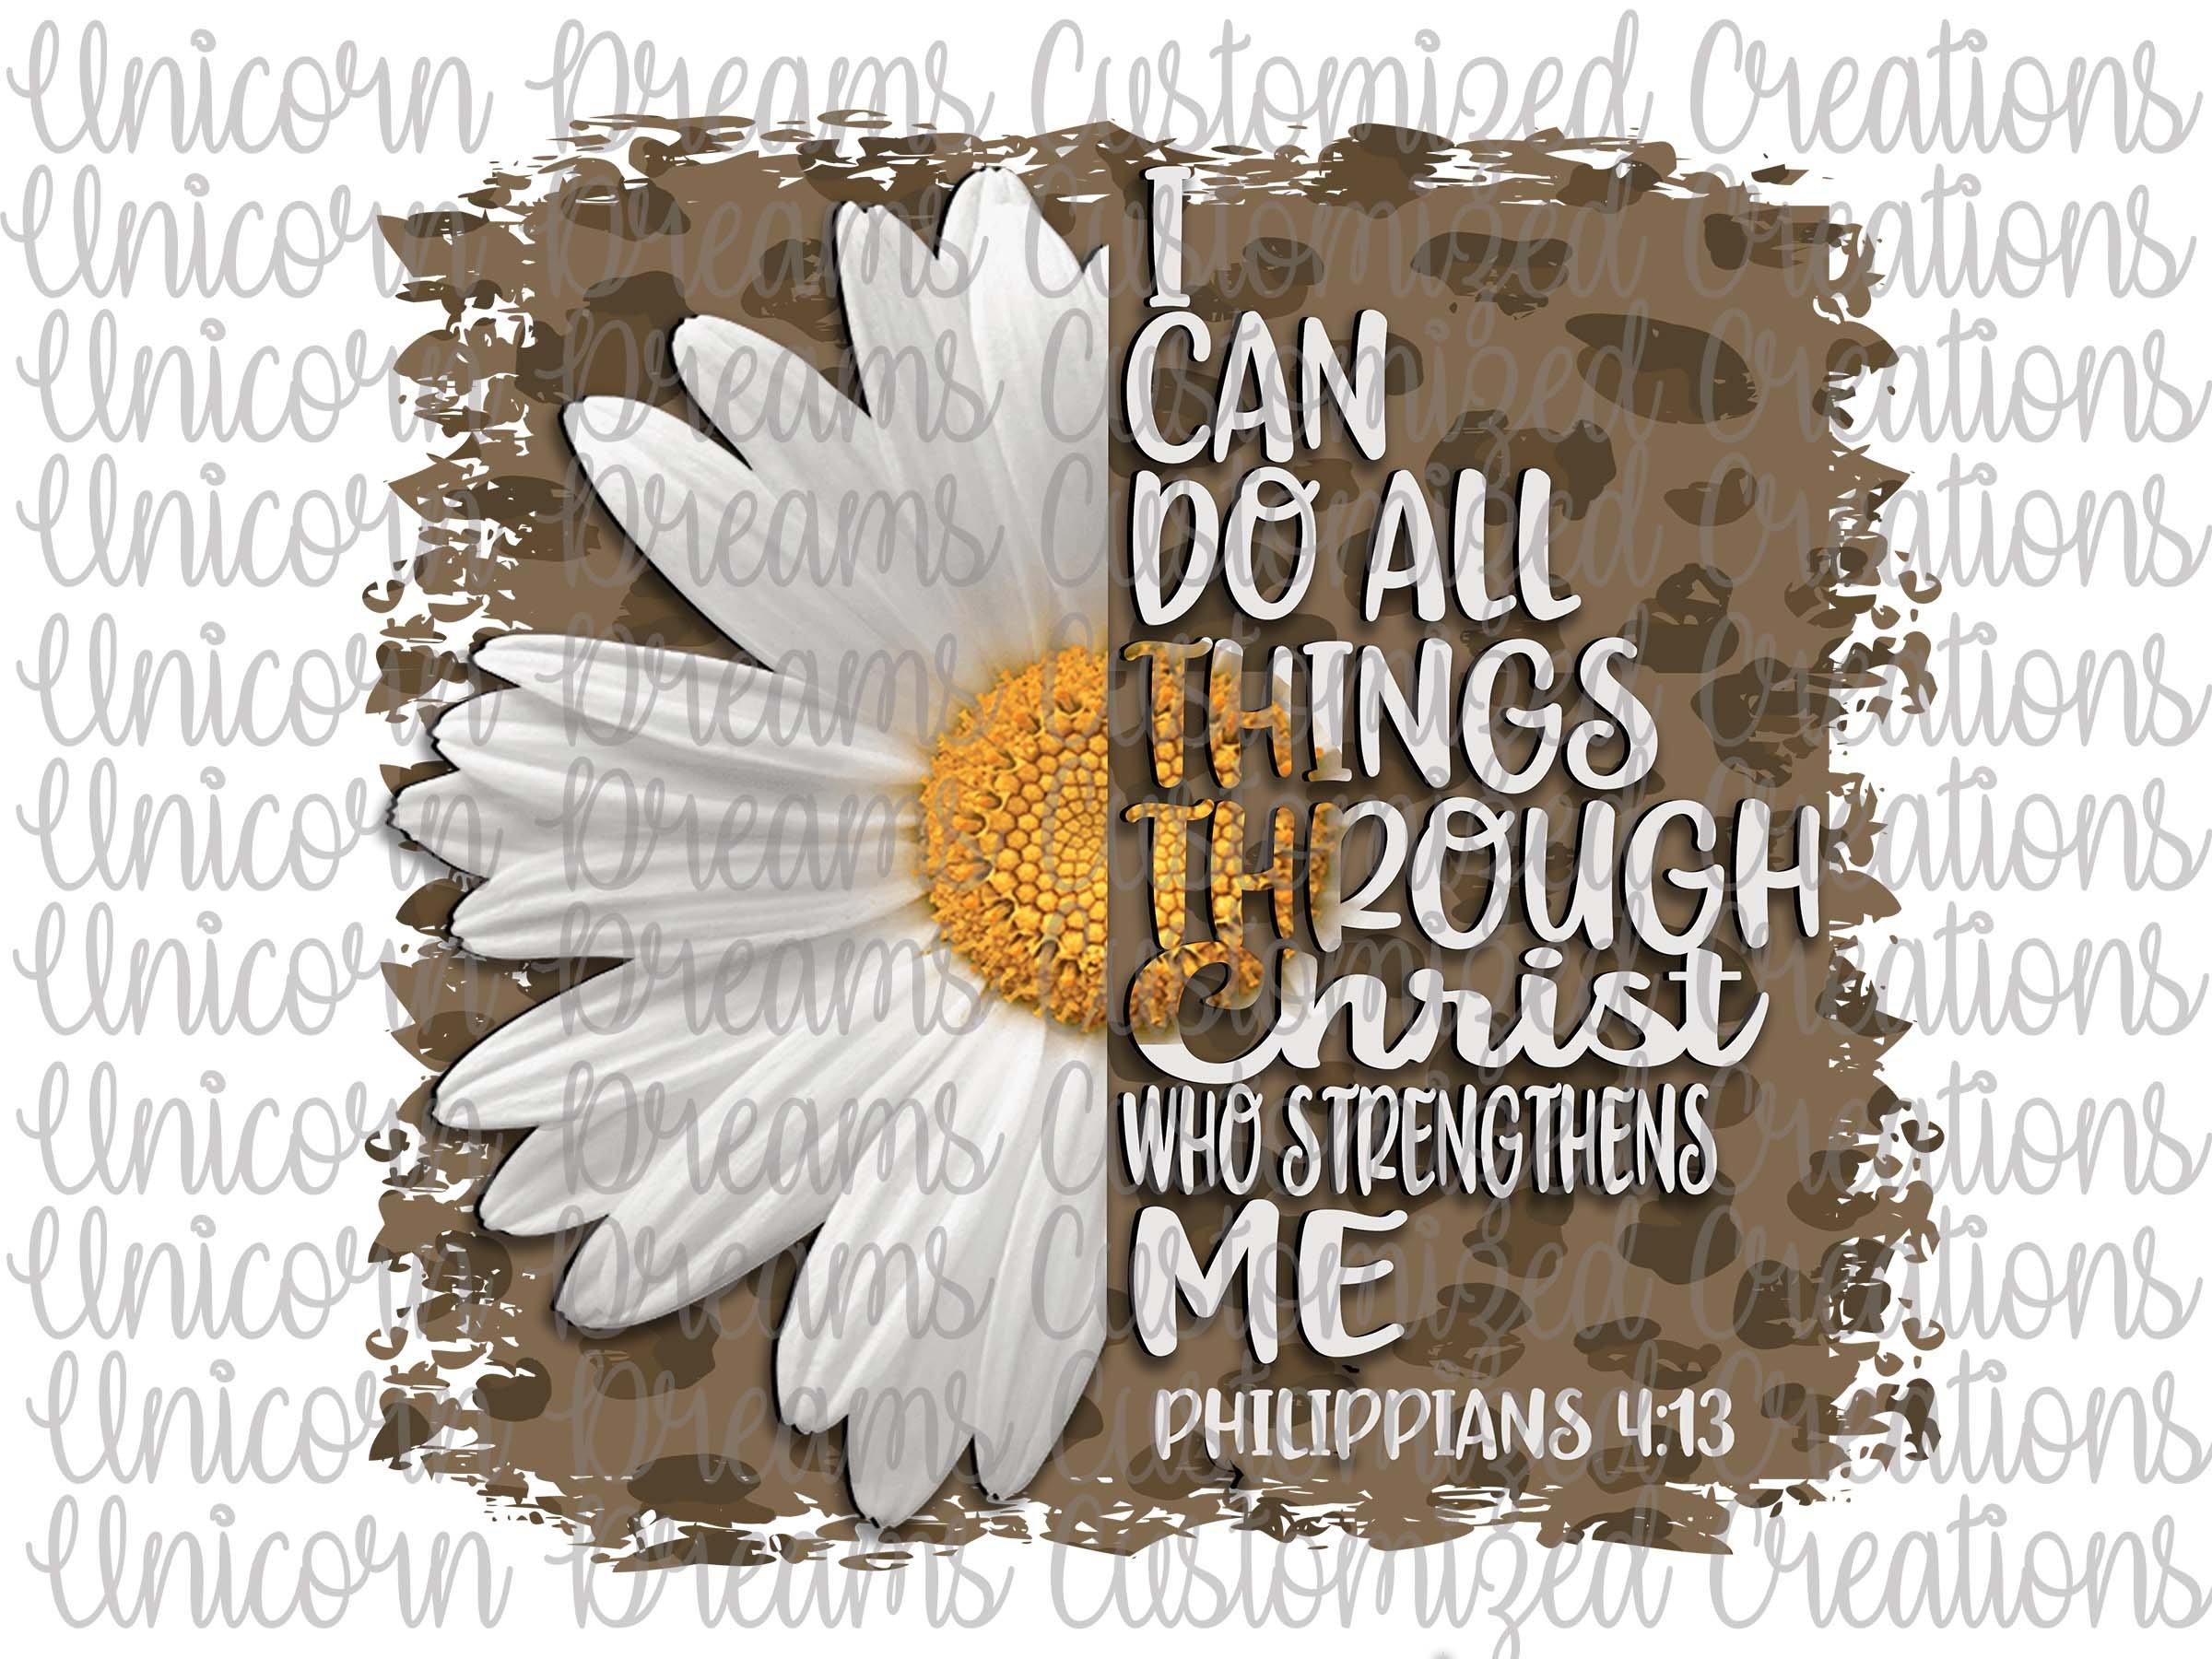 I Can Do All Things Through Christ Who Strengthens Me PNG Digital Download - Unicorn Dreams Customized Creations